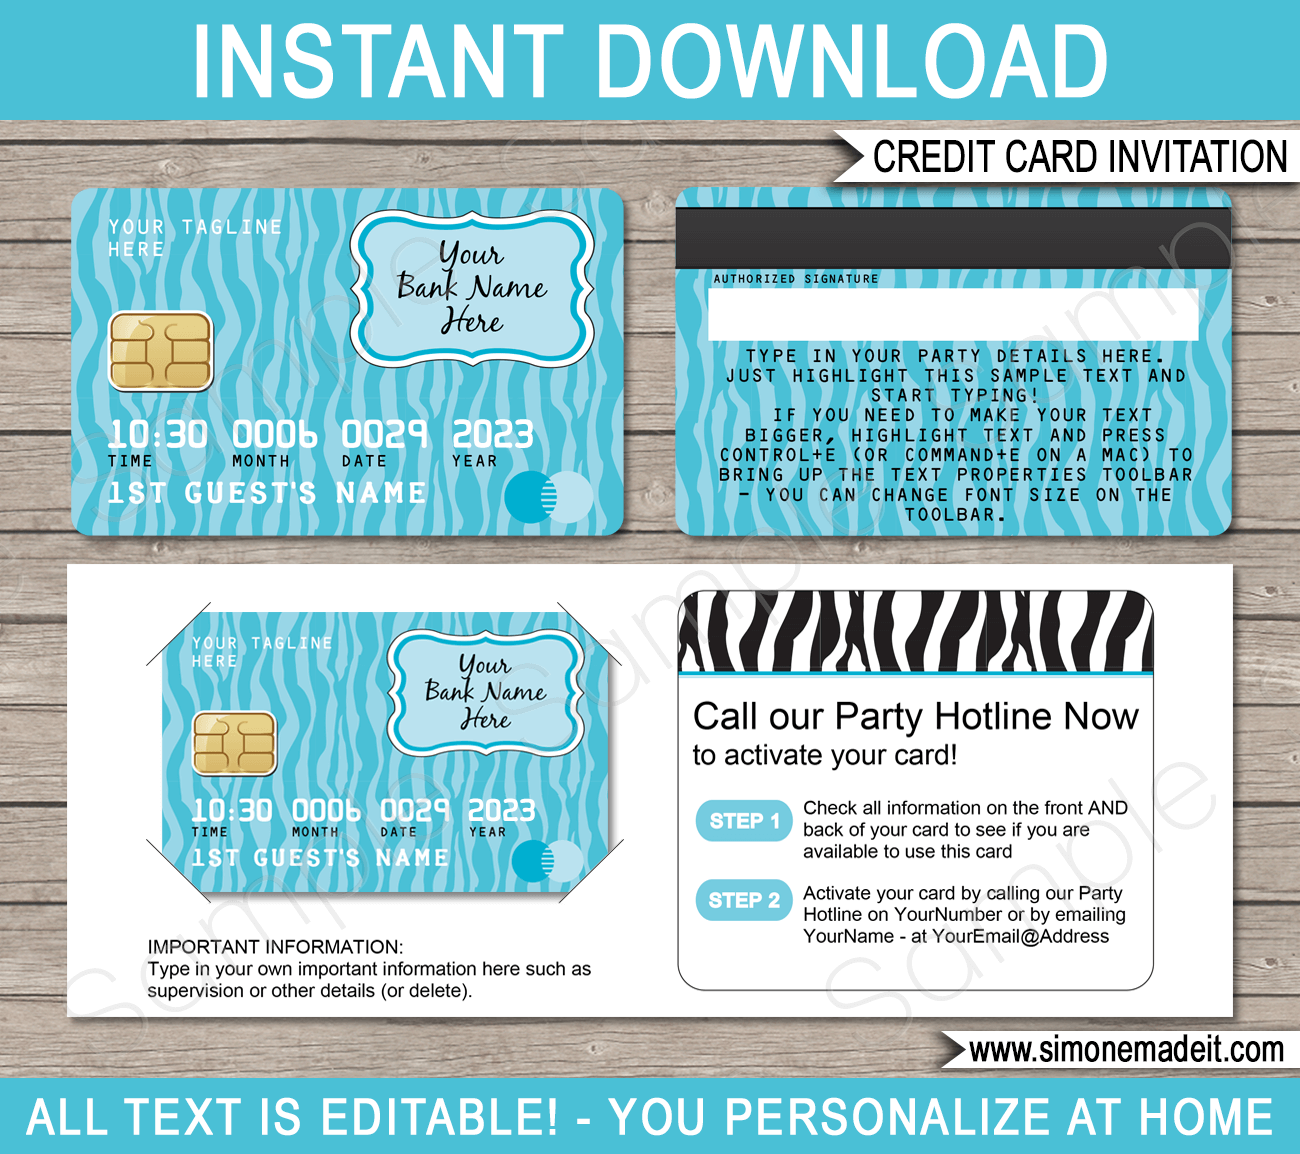 Credit Card Party Invitations | Mall Scavenger Hunt Party Invitations | Shopping Party Theme | Editable DIY Template | $7.50 INSTANT DOWNLOAD via SIMONEmadeit.com